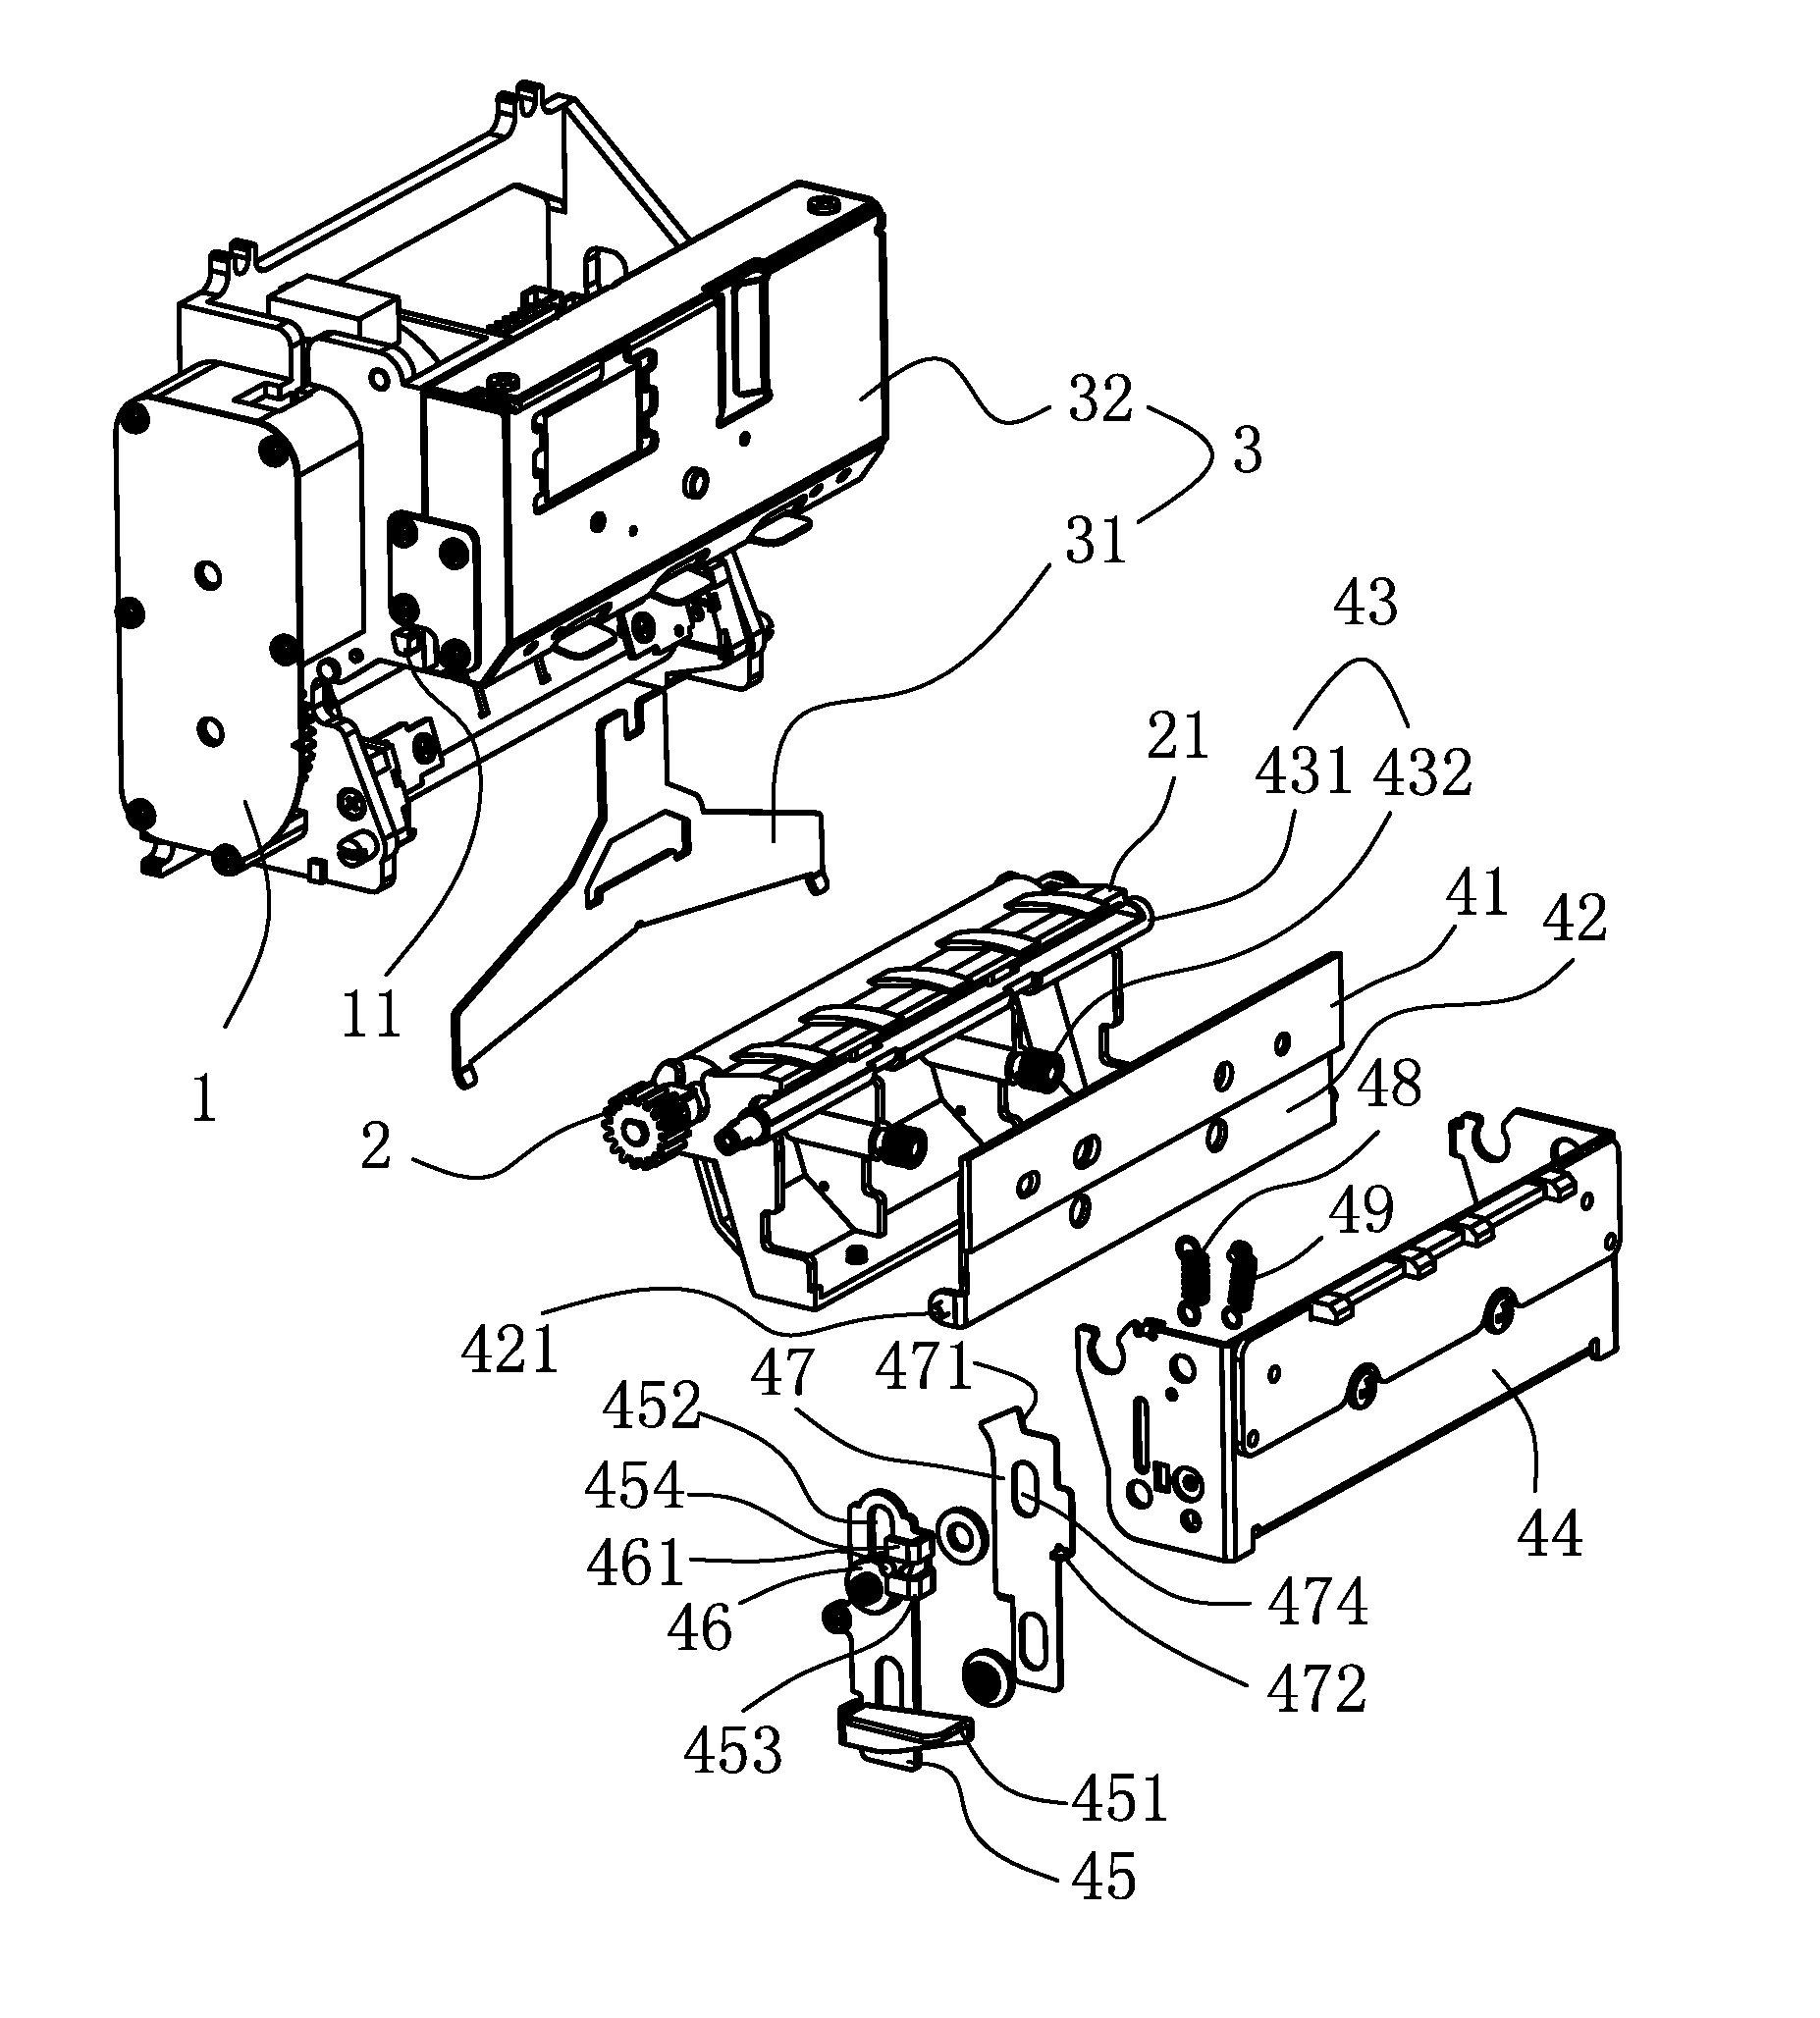 Printer and blade withdrawal mechanism thereof